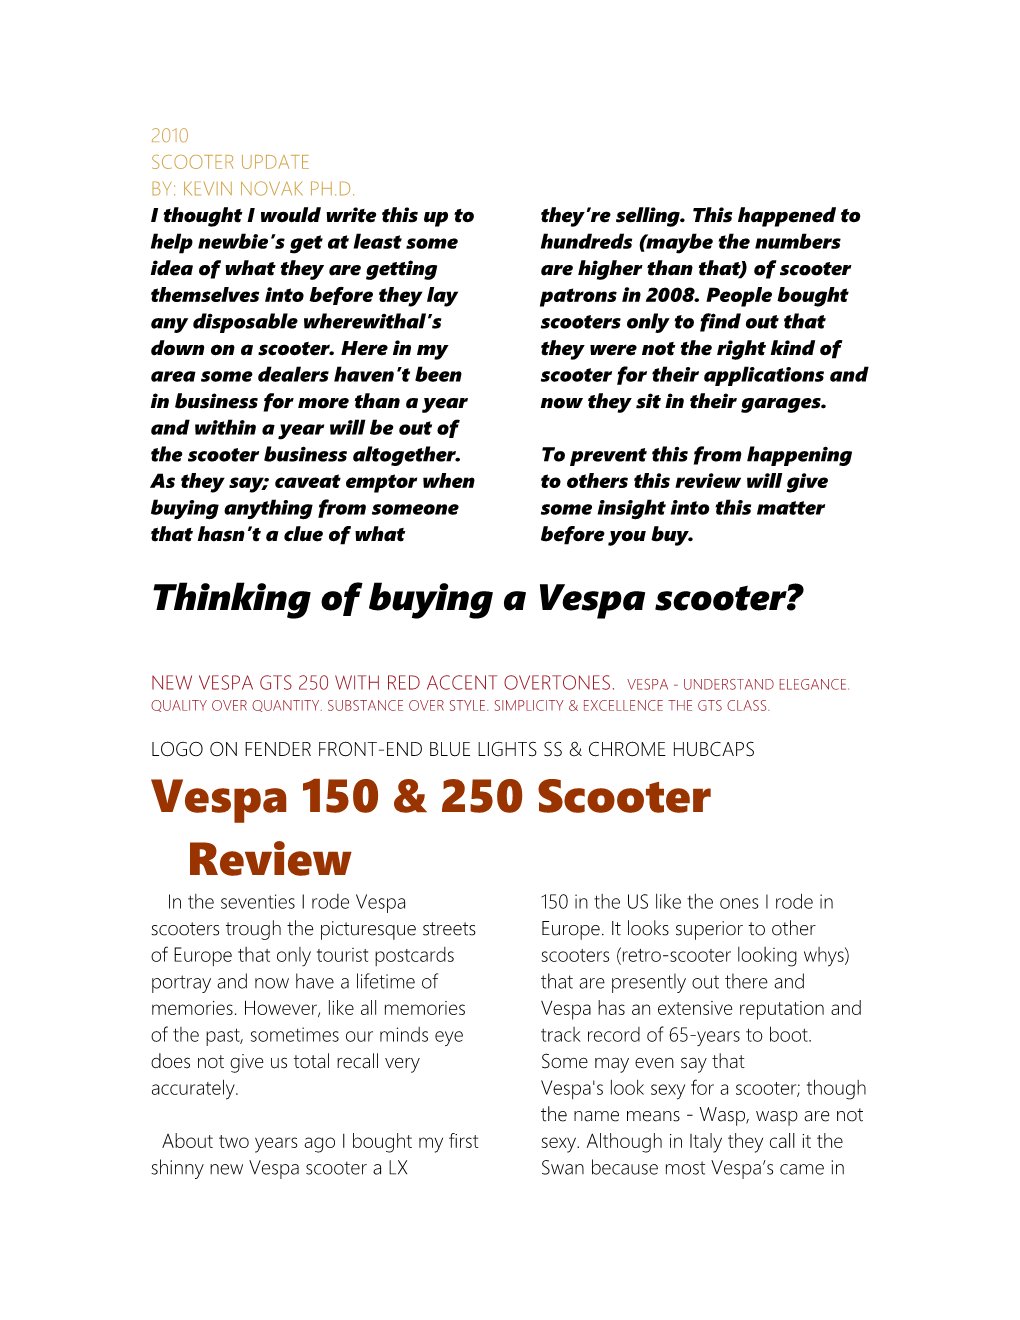 Thinking of Buying a Vespa Scooter?